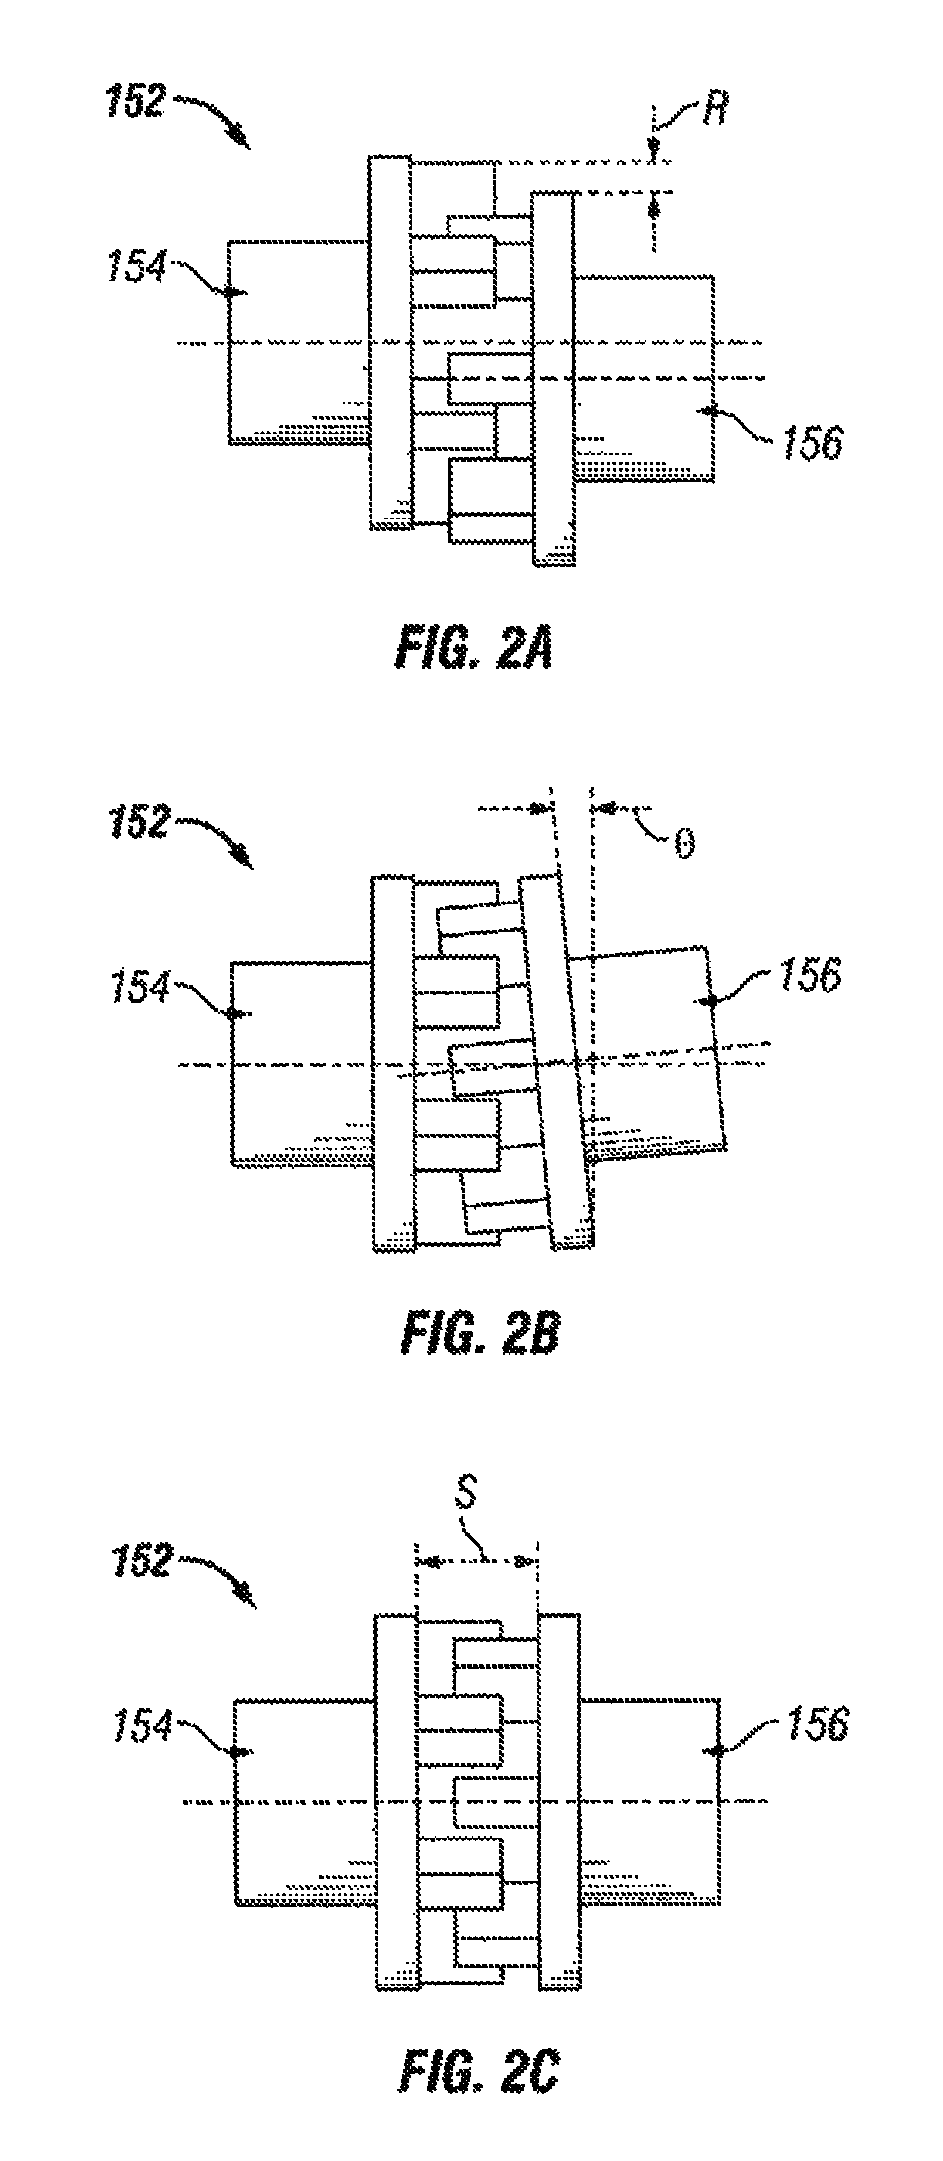 Torsional coupling for electric hydraulic fracturing fluid pumps